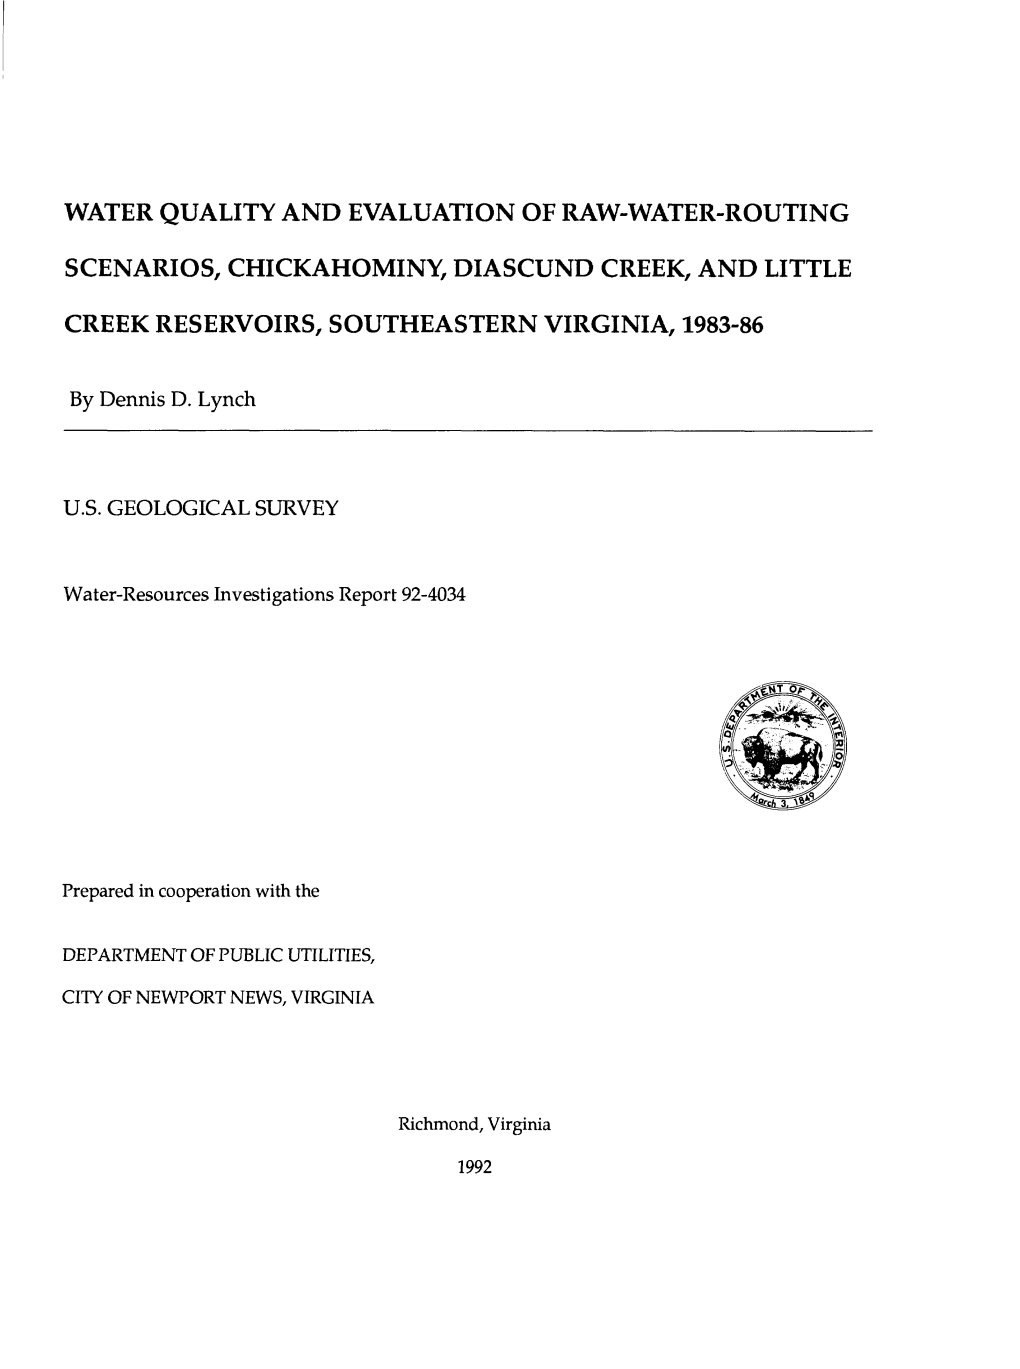 Water Quality and Evaluation of Raw-Water-Routing